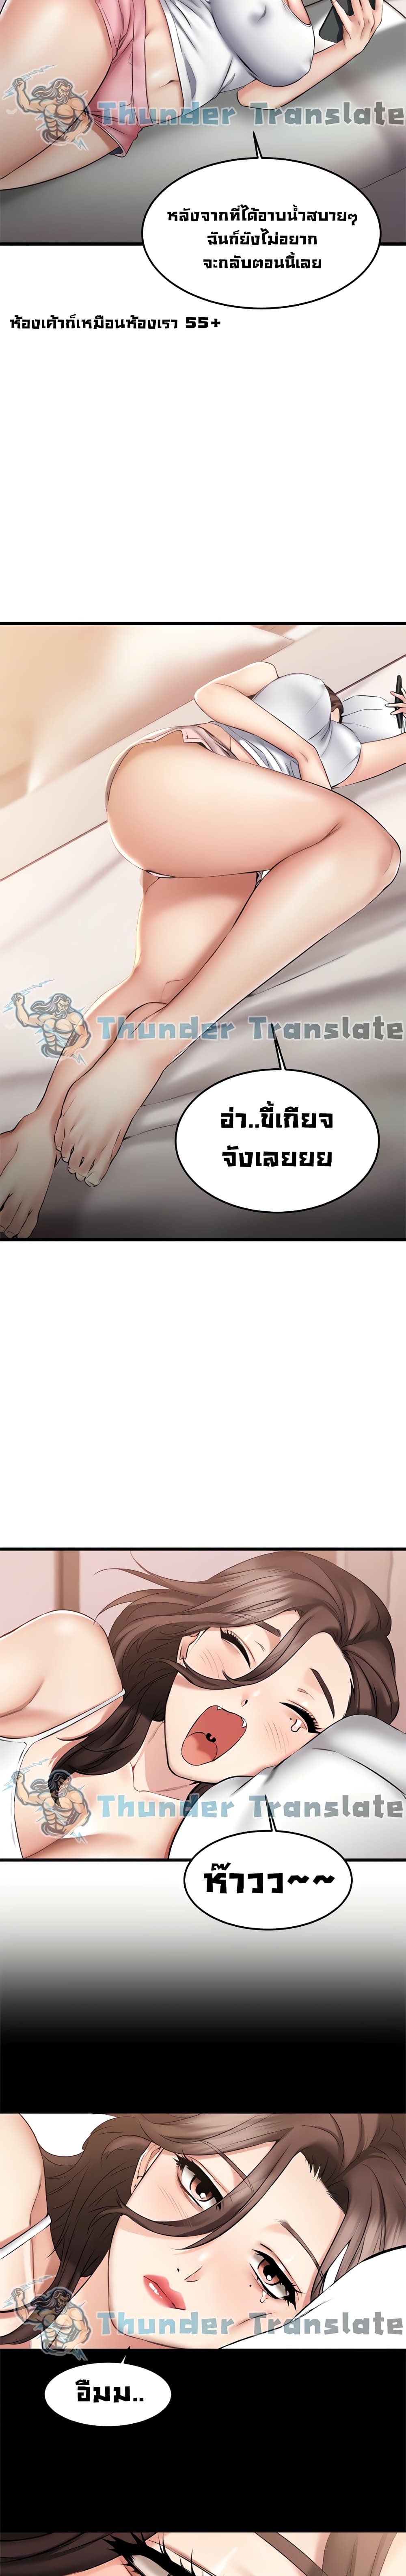 My Female Friend Who Crossed The Line 6 ภาพที่ 7